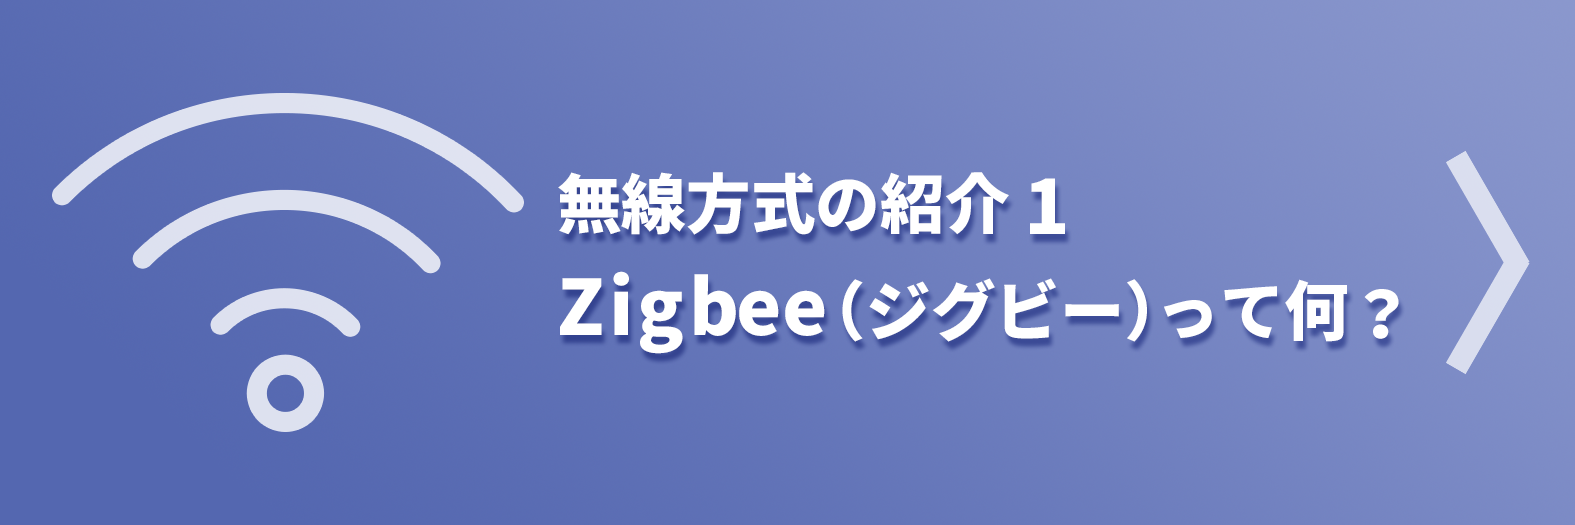 Introduction of Wireless System What is Zigbee?